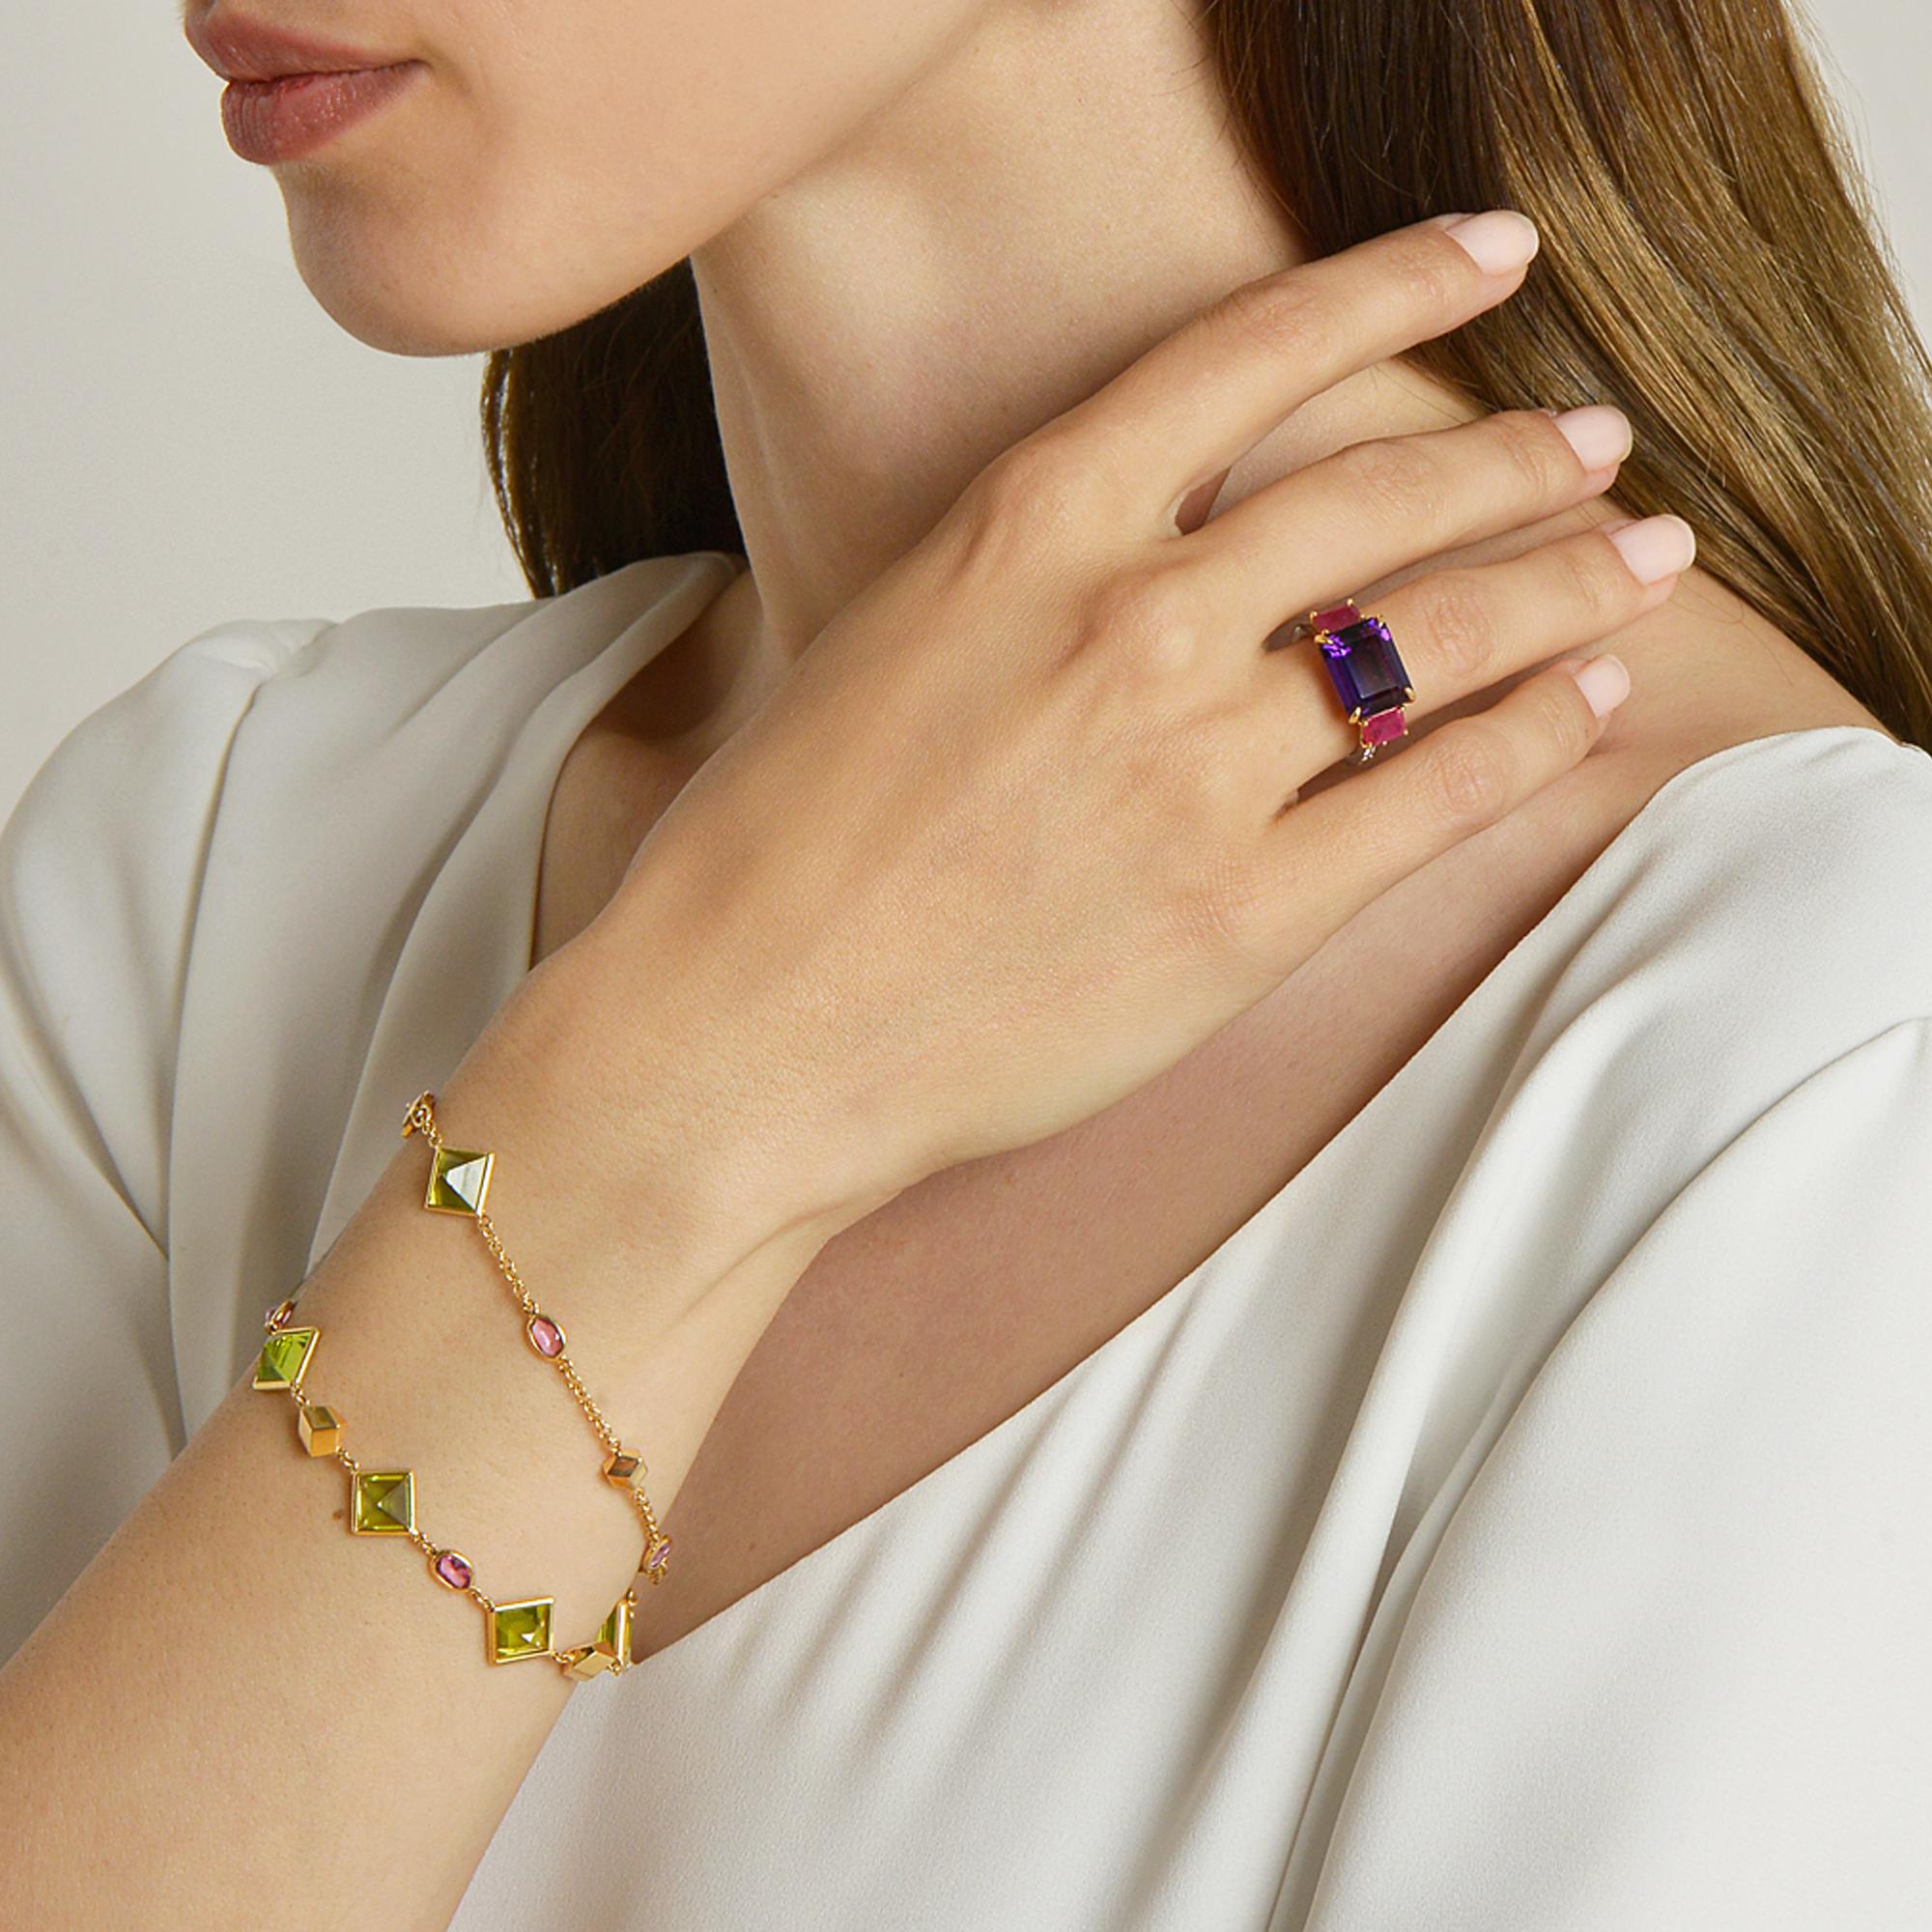 18kt yellow gold Florentine bracelet with bezel set emerald-cut peridot and oval pink sapphires, and signature Brillante® motif.

Inspired by the Garden of the Iris, the Florentine collection pairs bold color combinations of geometric gemstones to